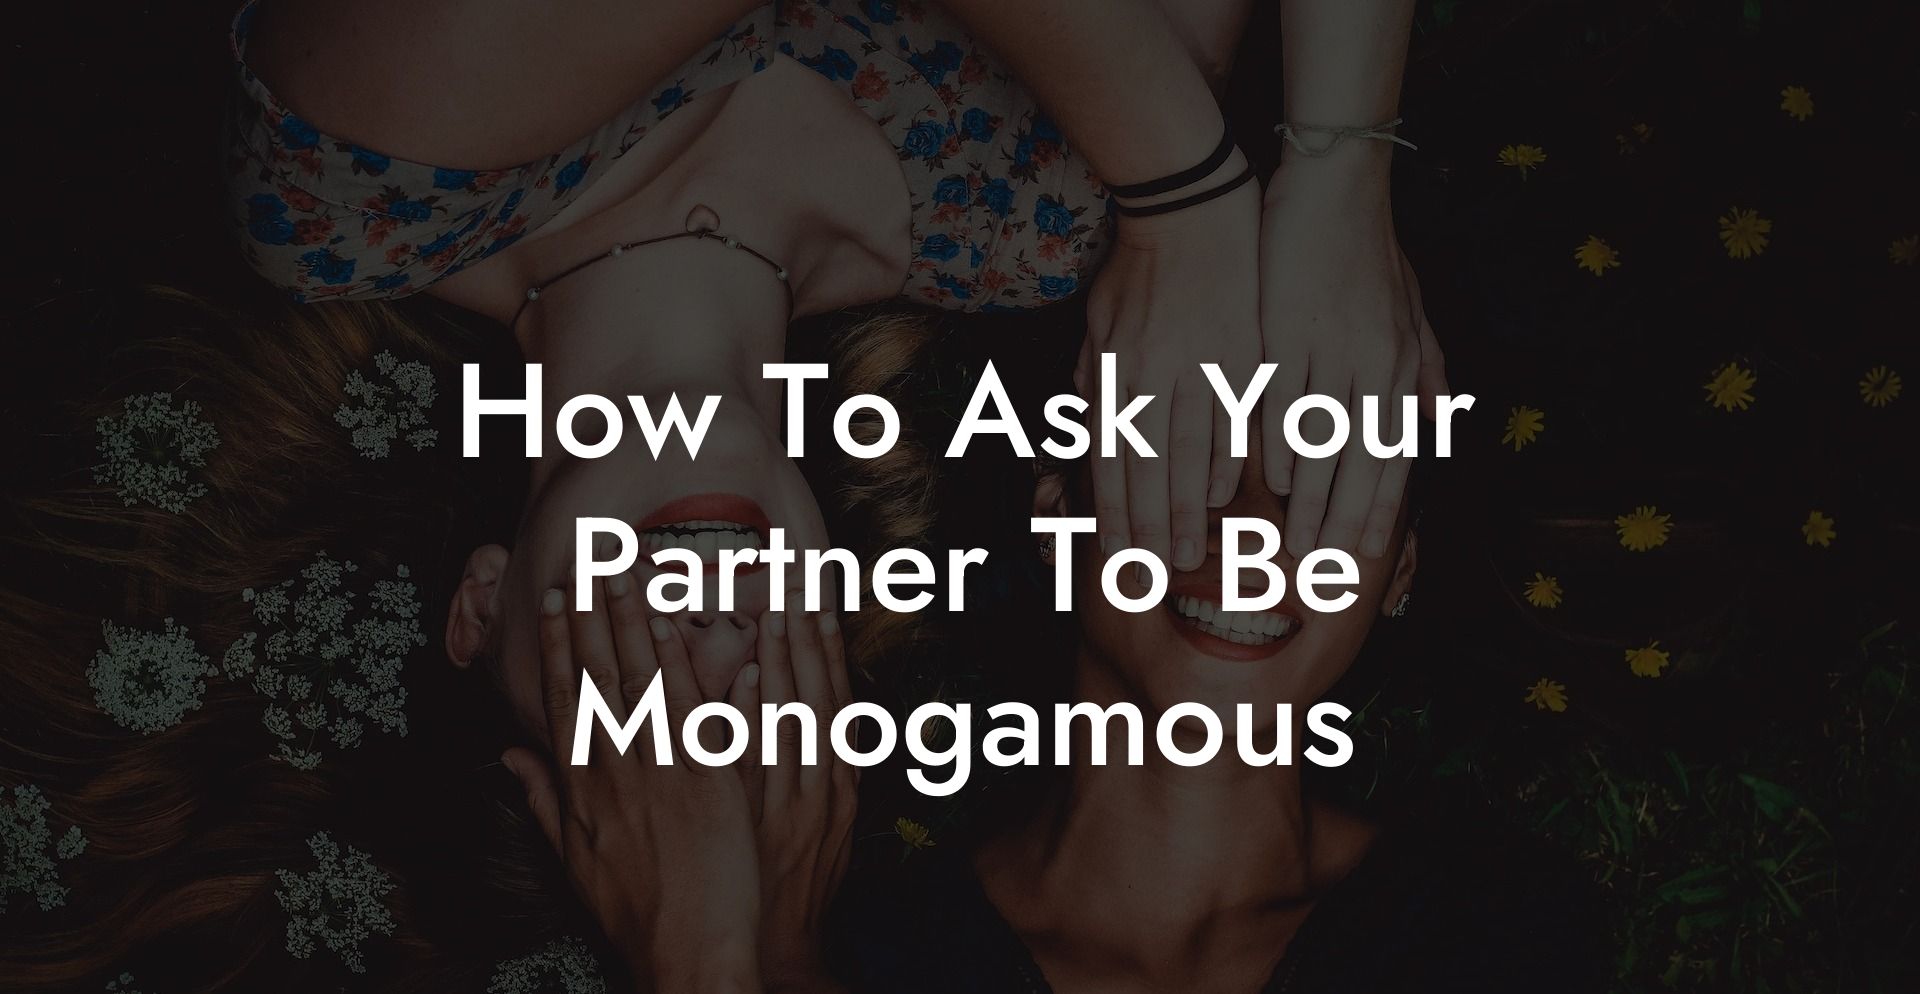 How To Ask Your Partner To Be Monogamous